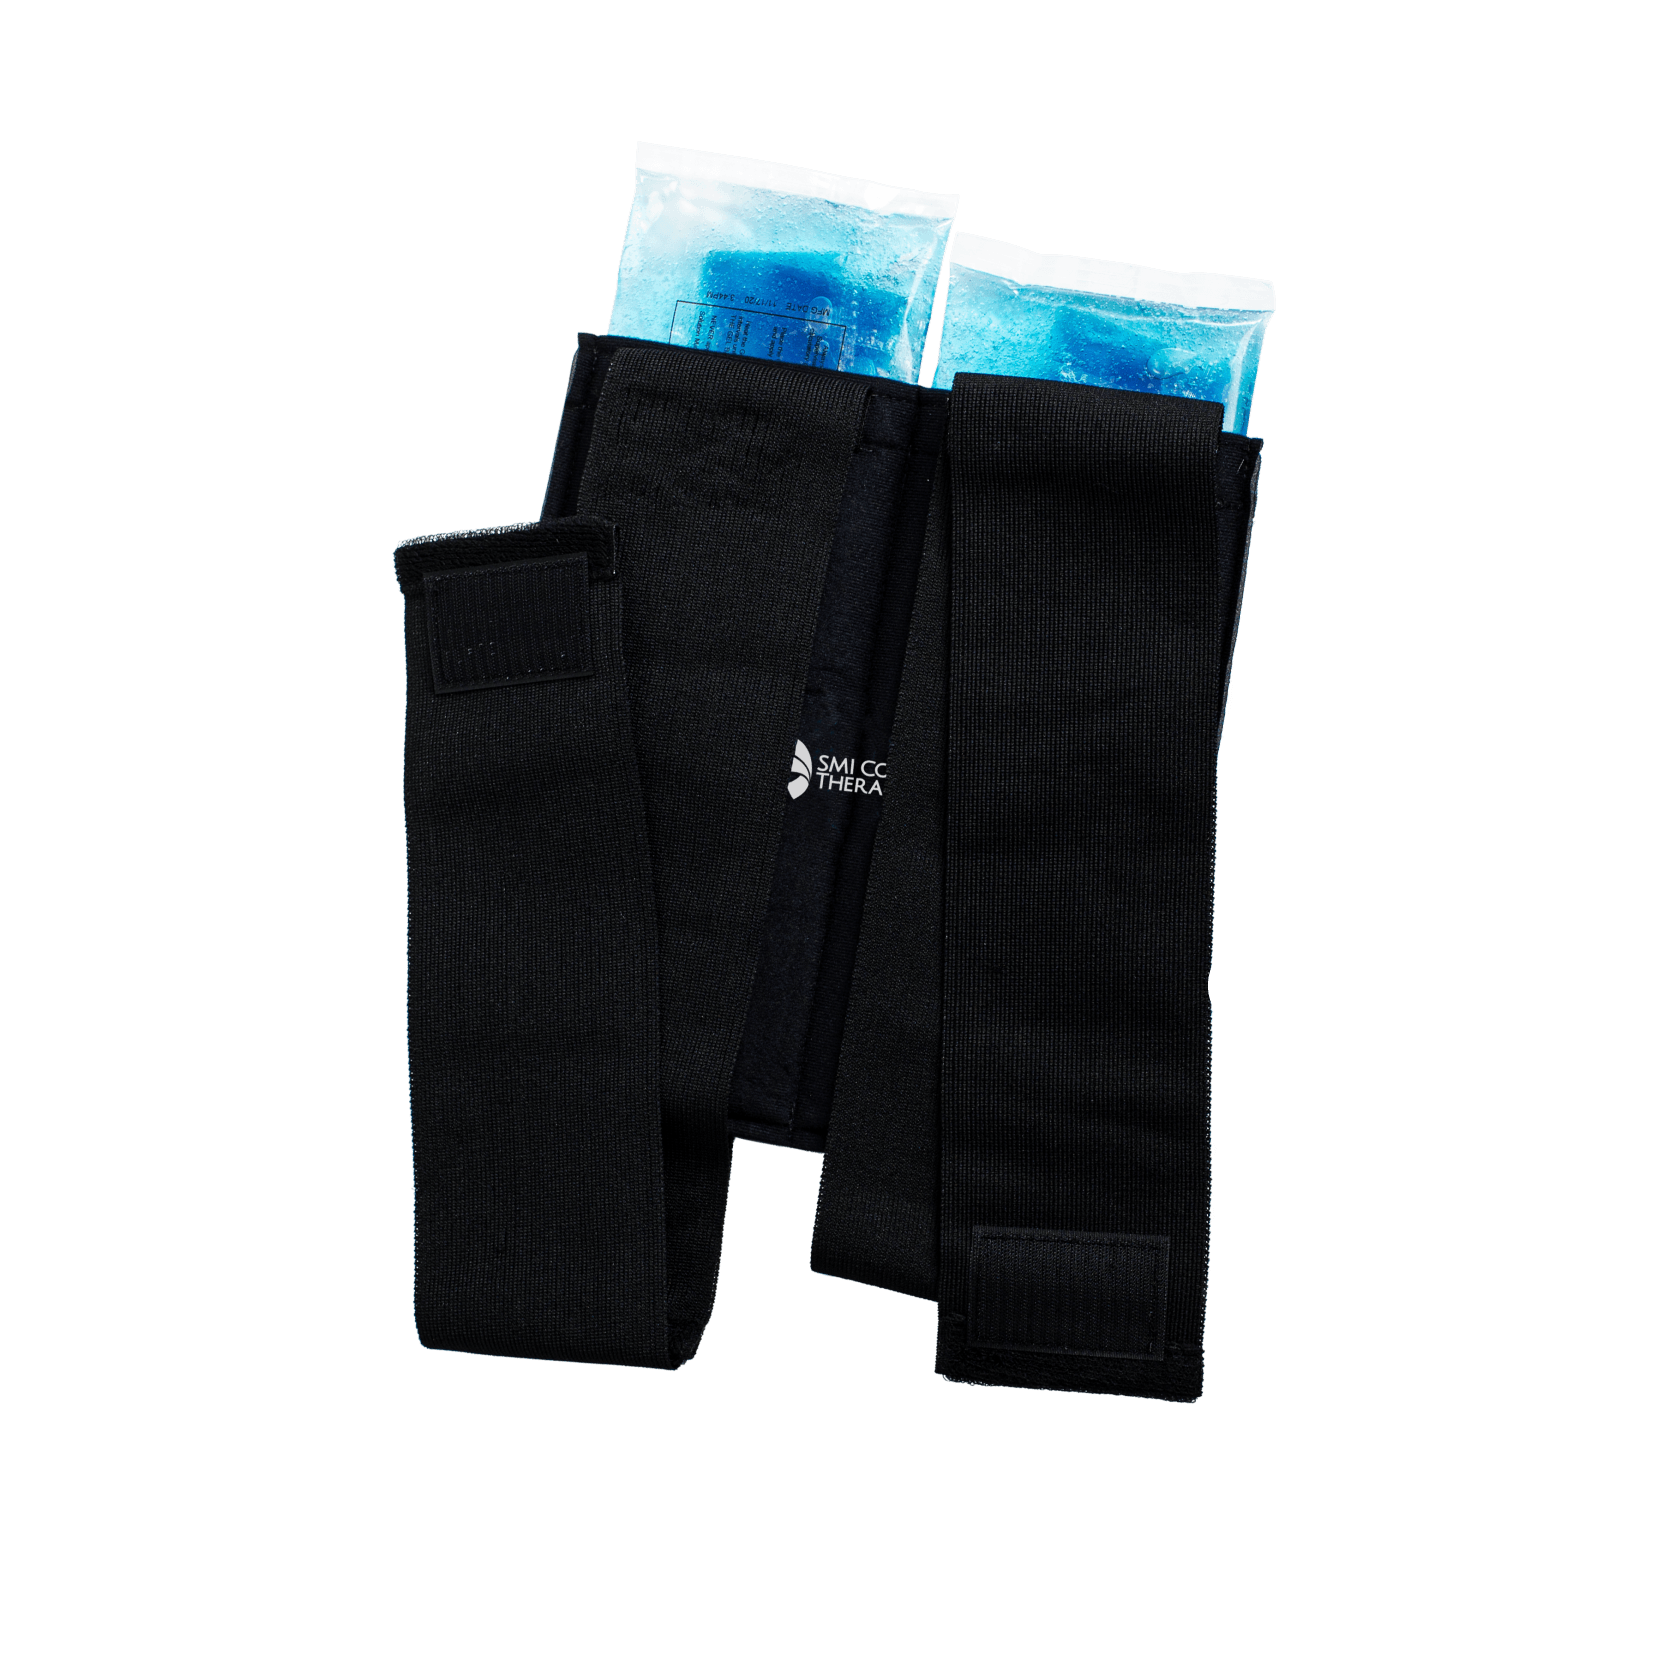 SMI Cold Compression Wraps - H-4-IP SMI Cold Compression Wraps - undefined by Supply Physical Therapy Compression Straps, ice wrap, SMI Cold Therapy